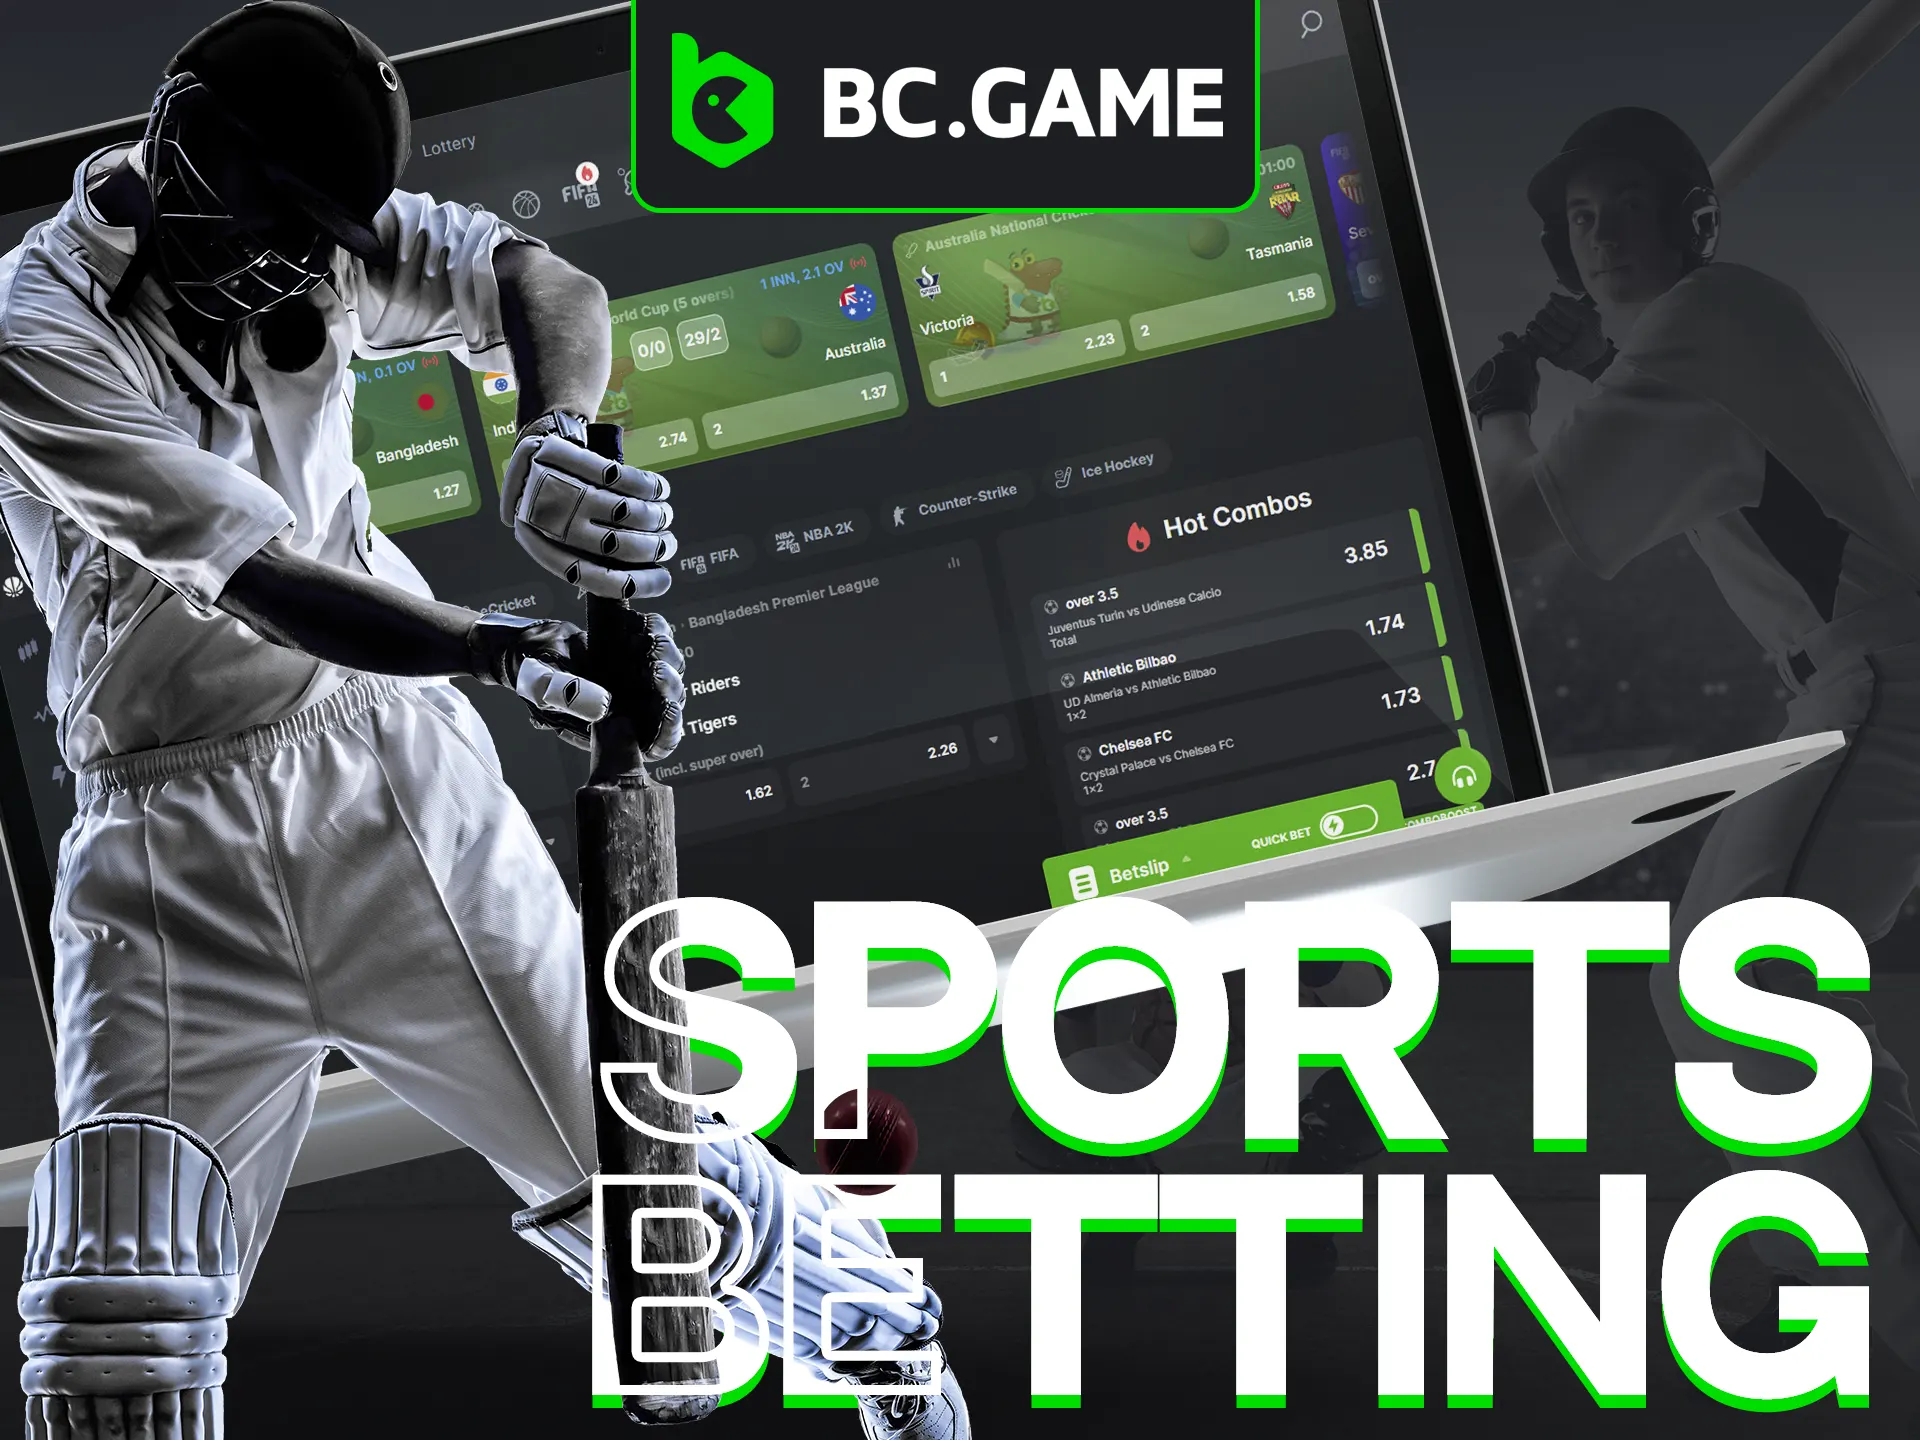 BC Game offers diverse sports betting options, including cricket.